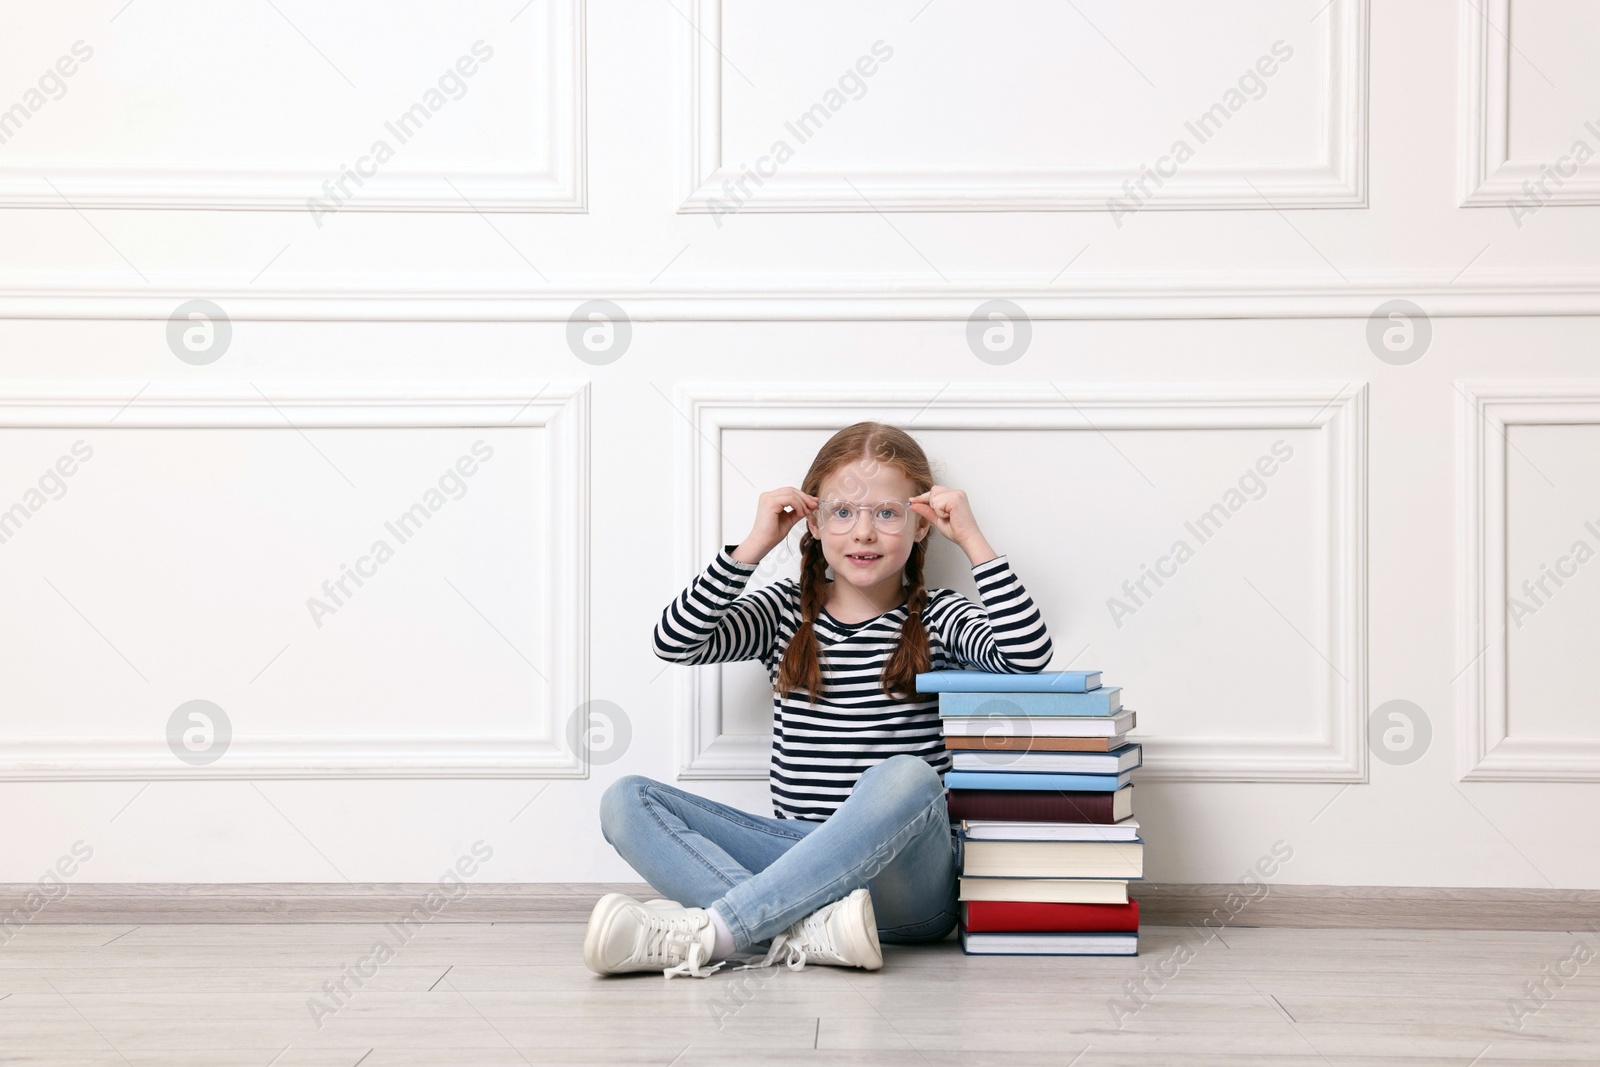 Photo of Cute girl sitting with stack of books indoors